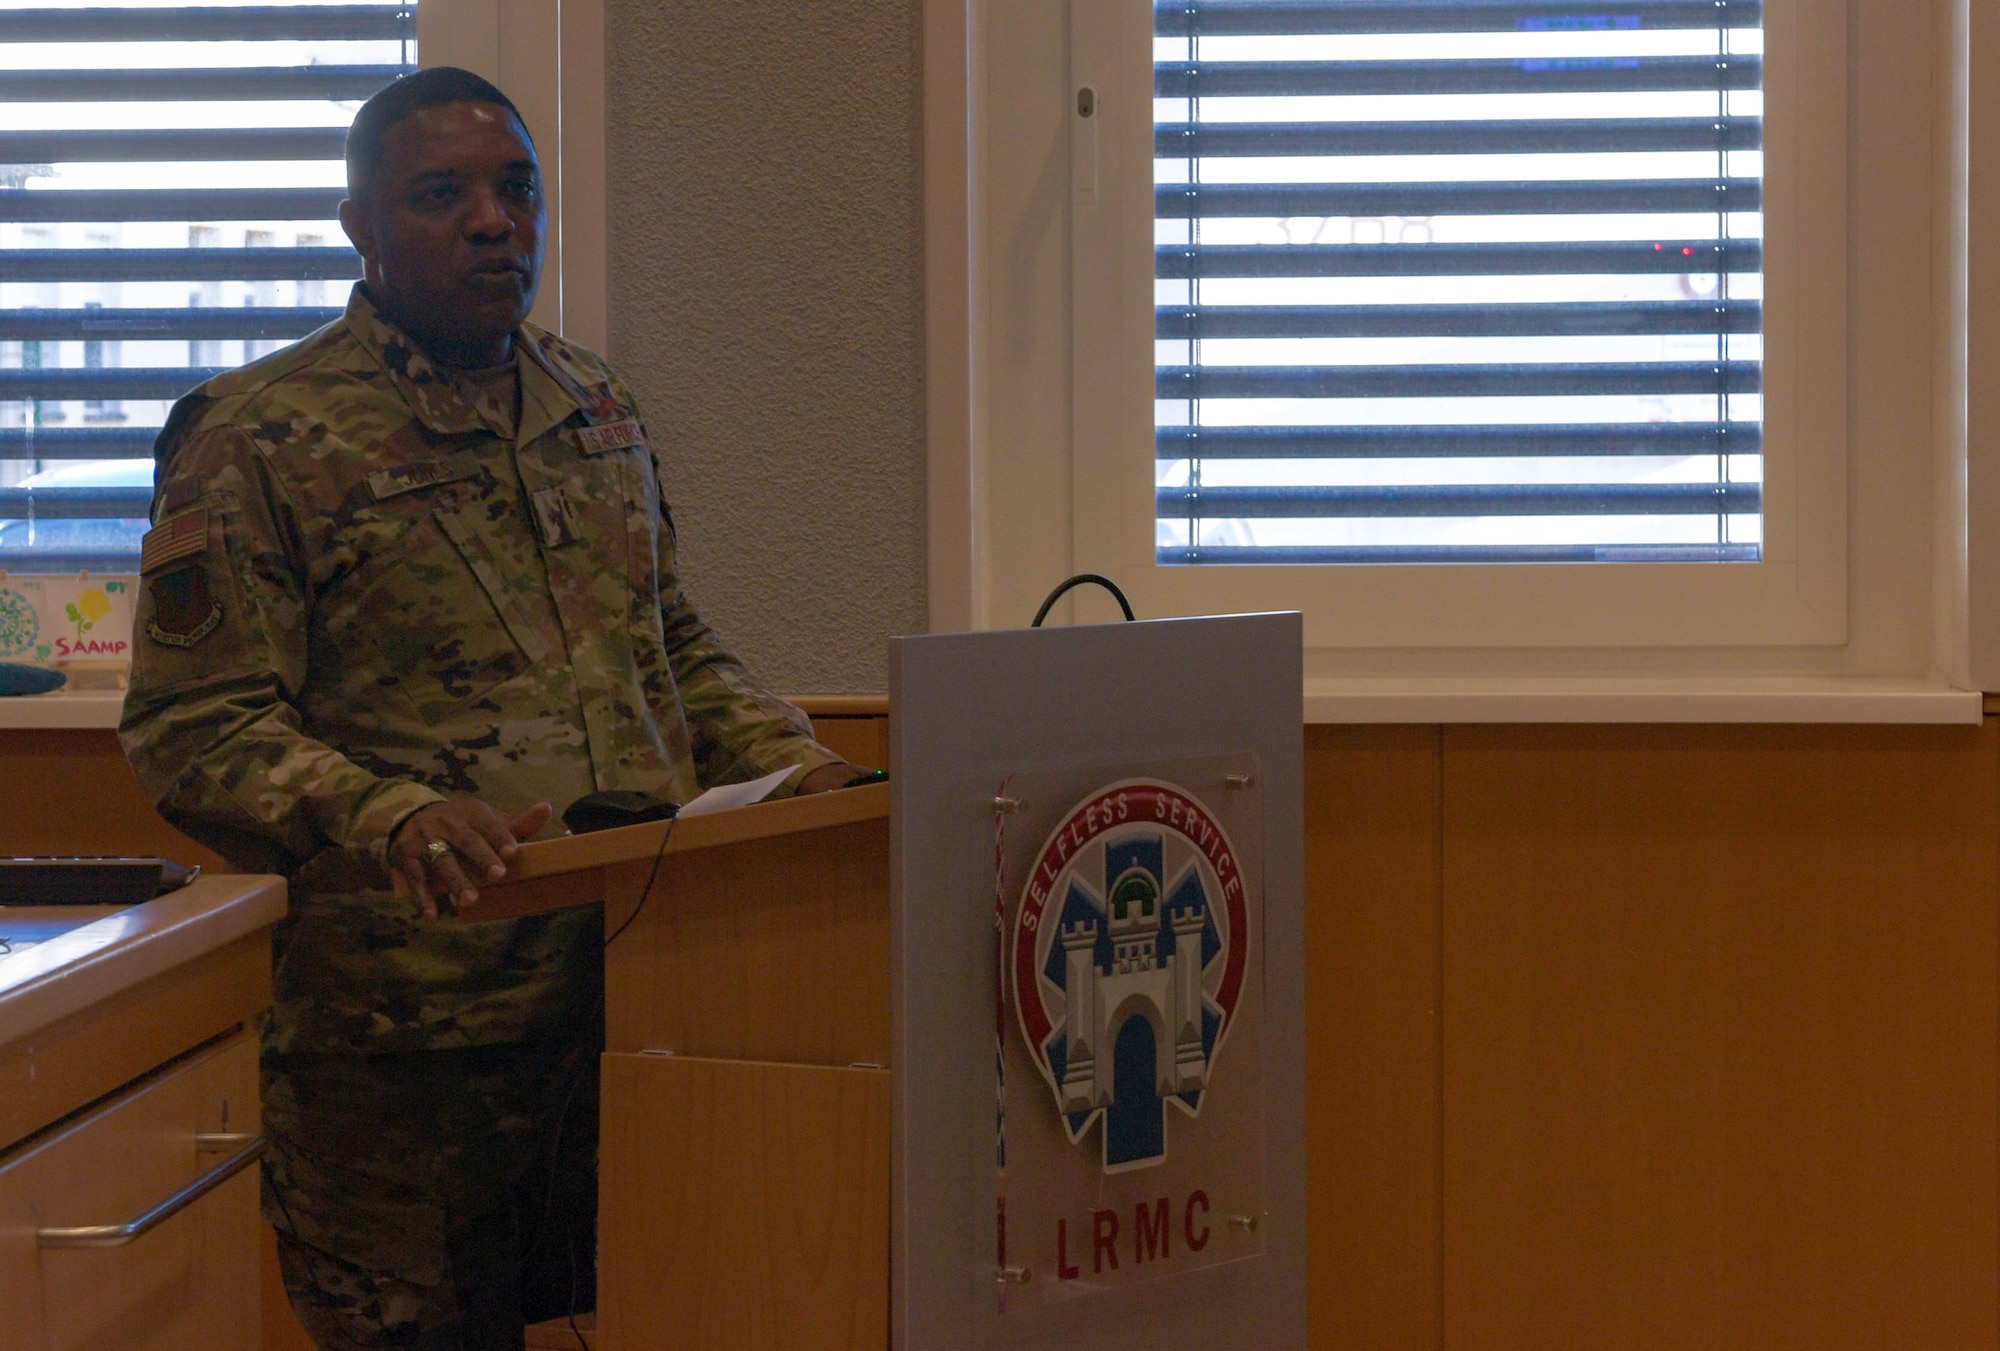 U.S. Air Force Brig. Gen. Otis C. Jones, 86th Airlift Wing commander, provides remarks during a cake cutting ceremony at Landstuhl Regional Medical Center, Germany, April 14, 2023. LRMC and the 86th Medical Squadron celebrated their 30-year partnership with the local community.